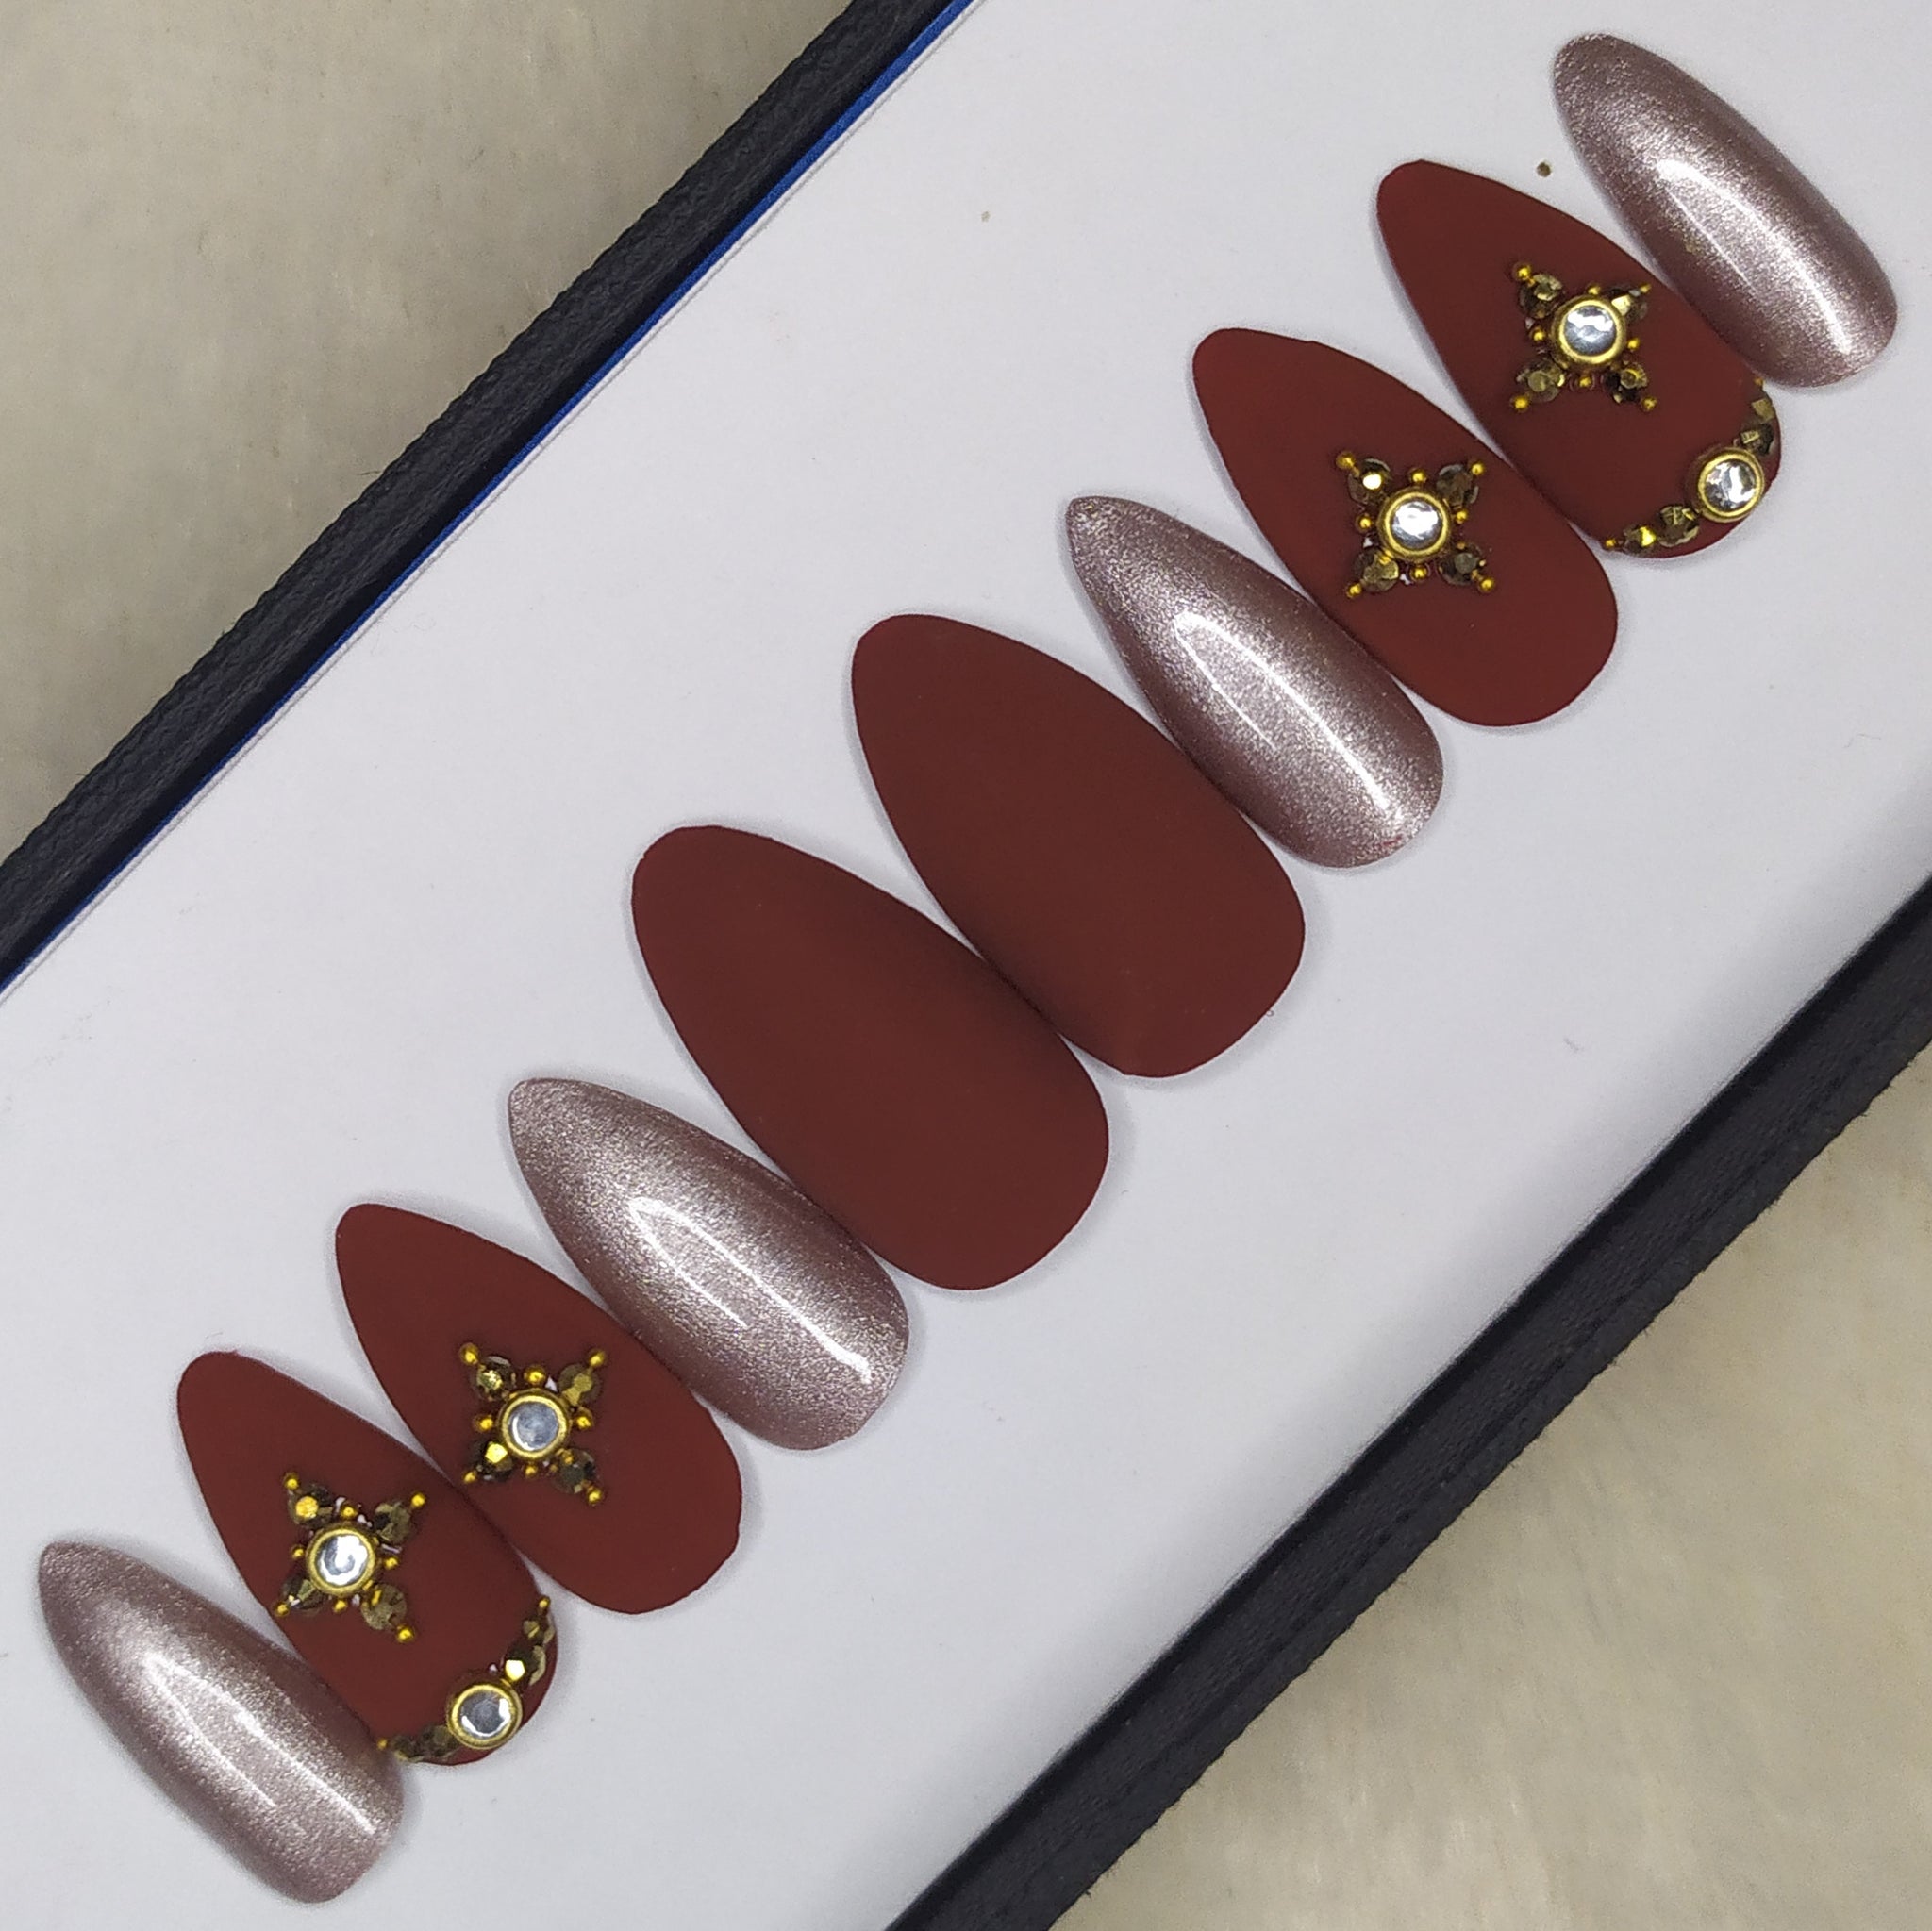 Stiletto Nude Rose Metal Crystal Maroon Acrylic Nails Coffin Full Set, Long  Go, Customizable, Burgundy, Press On Rose Gold Finish 230626 From Bian04,  $12.79 | DHgate.Com